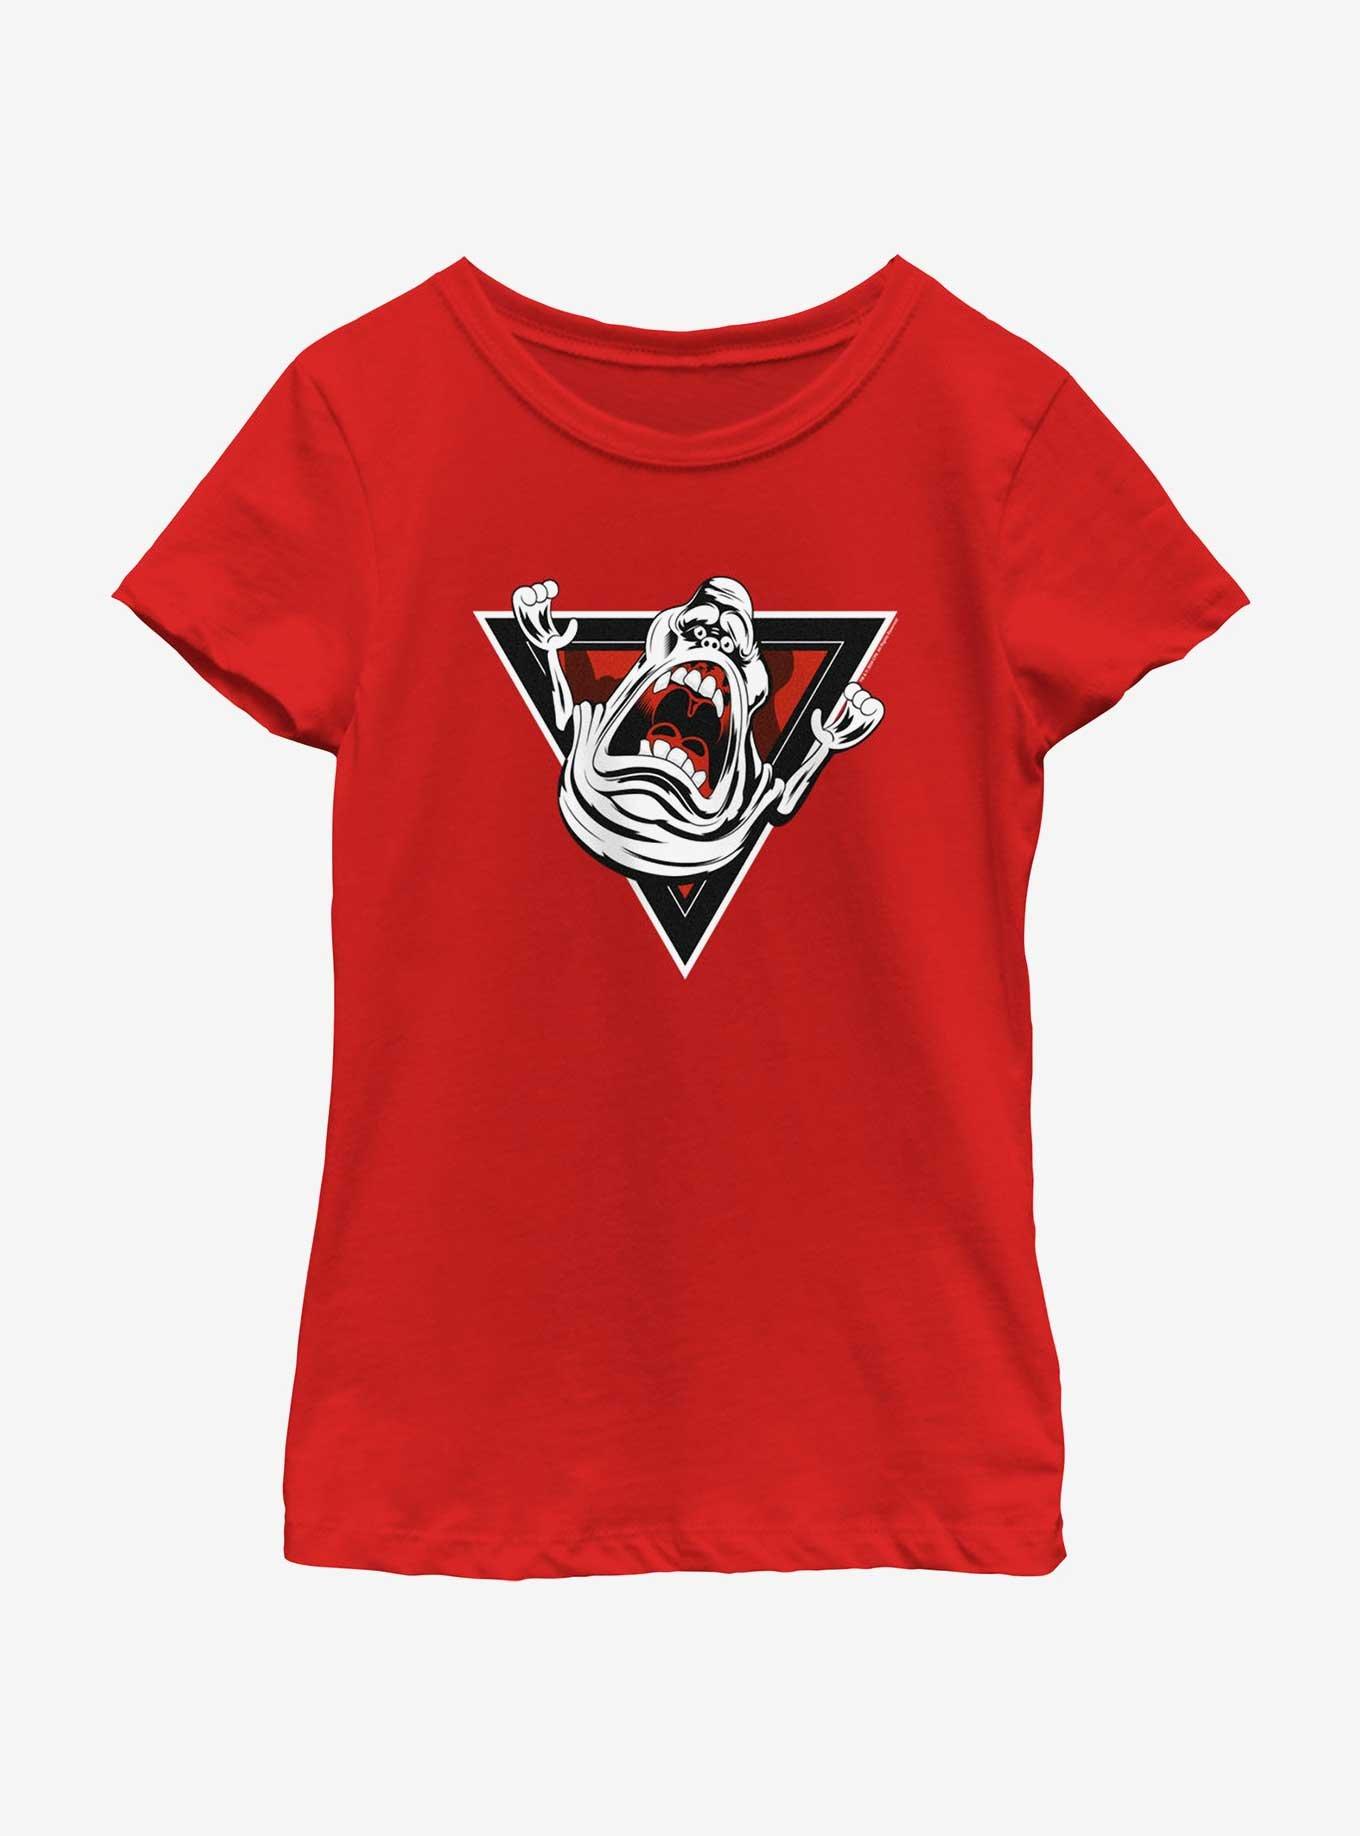 Ghostbusters: Frozen Empire Screaming Slimer Girls Youth T-Shirt, RED, hi-res